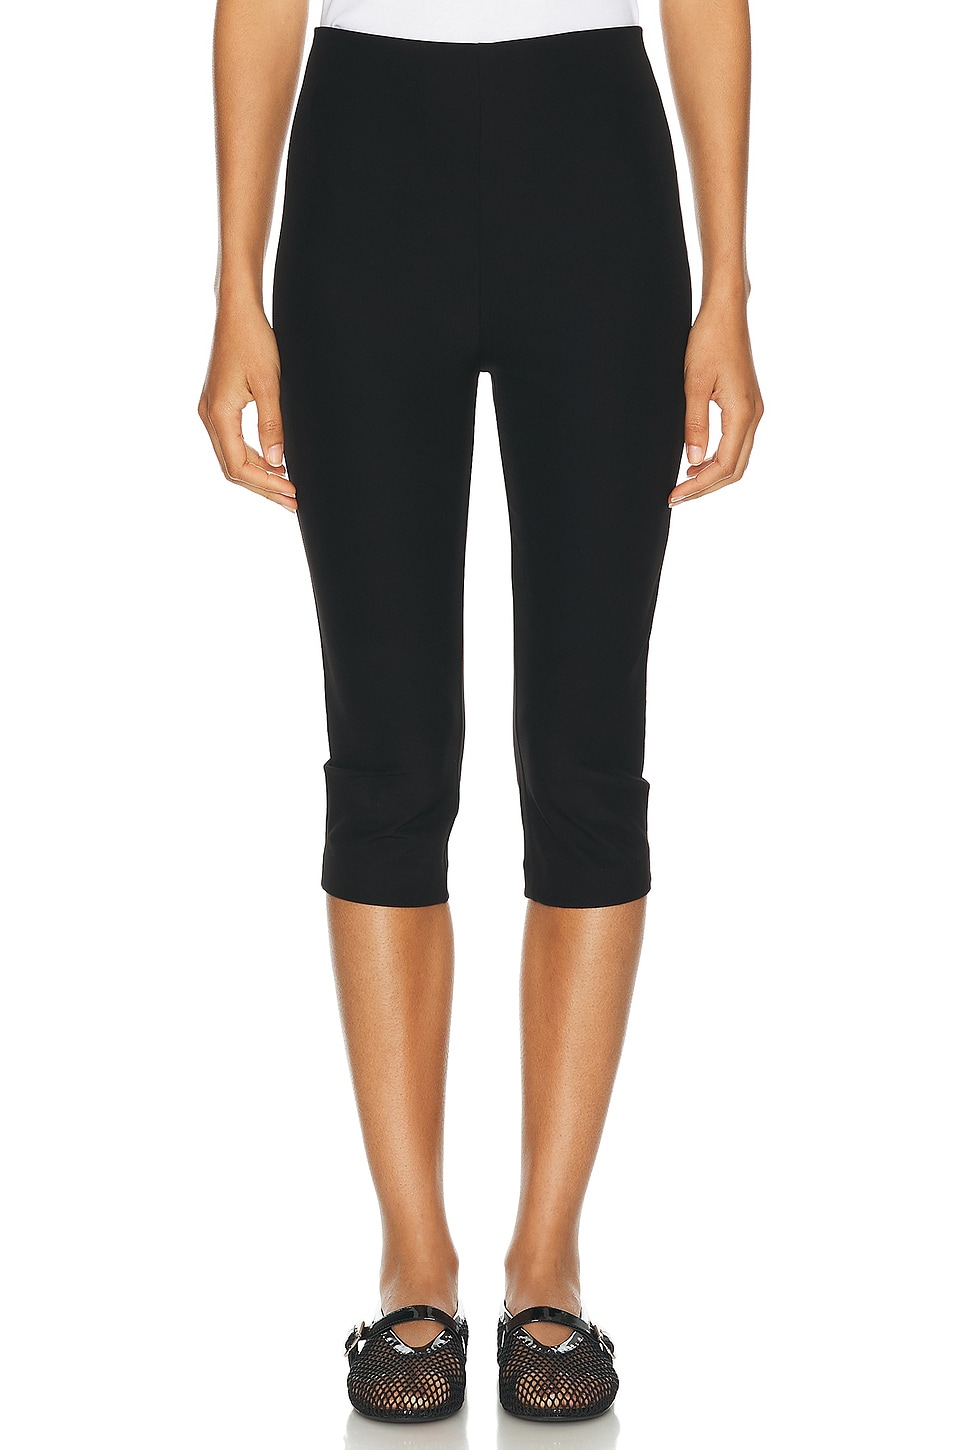 Image 1 of L'Academie by Marianna Athina Capri Pant in Black